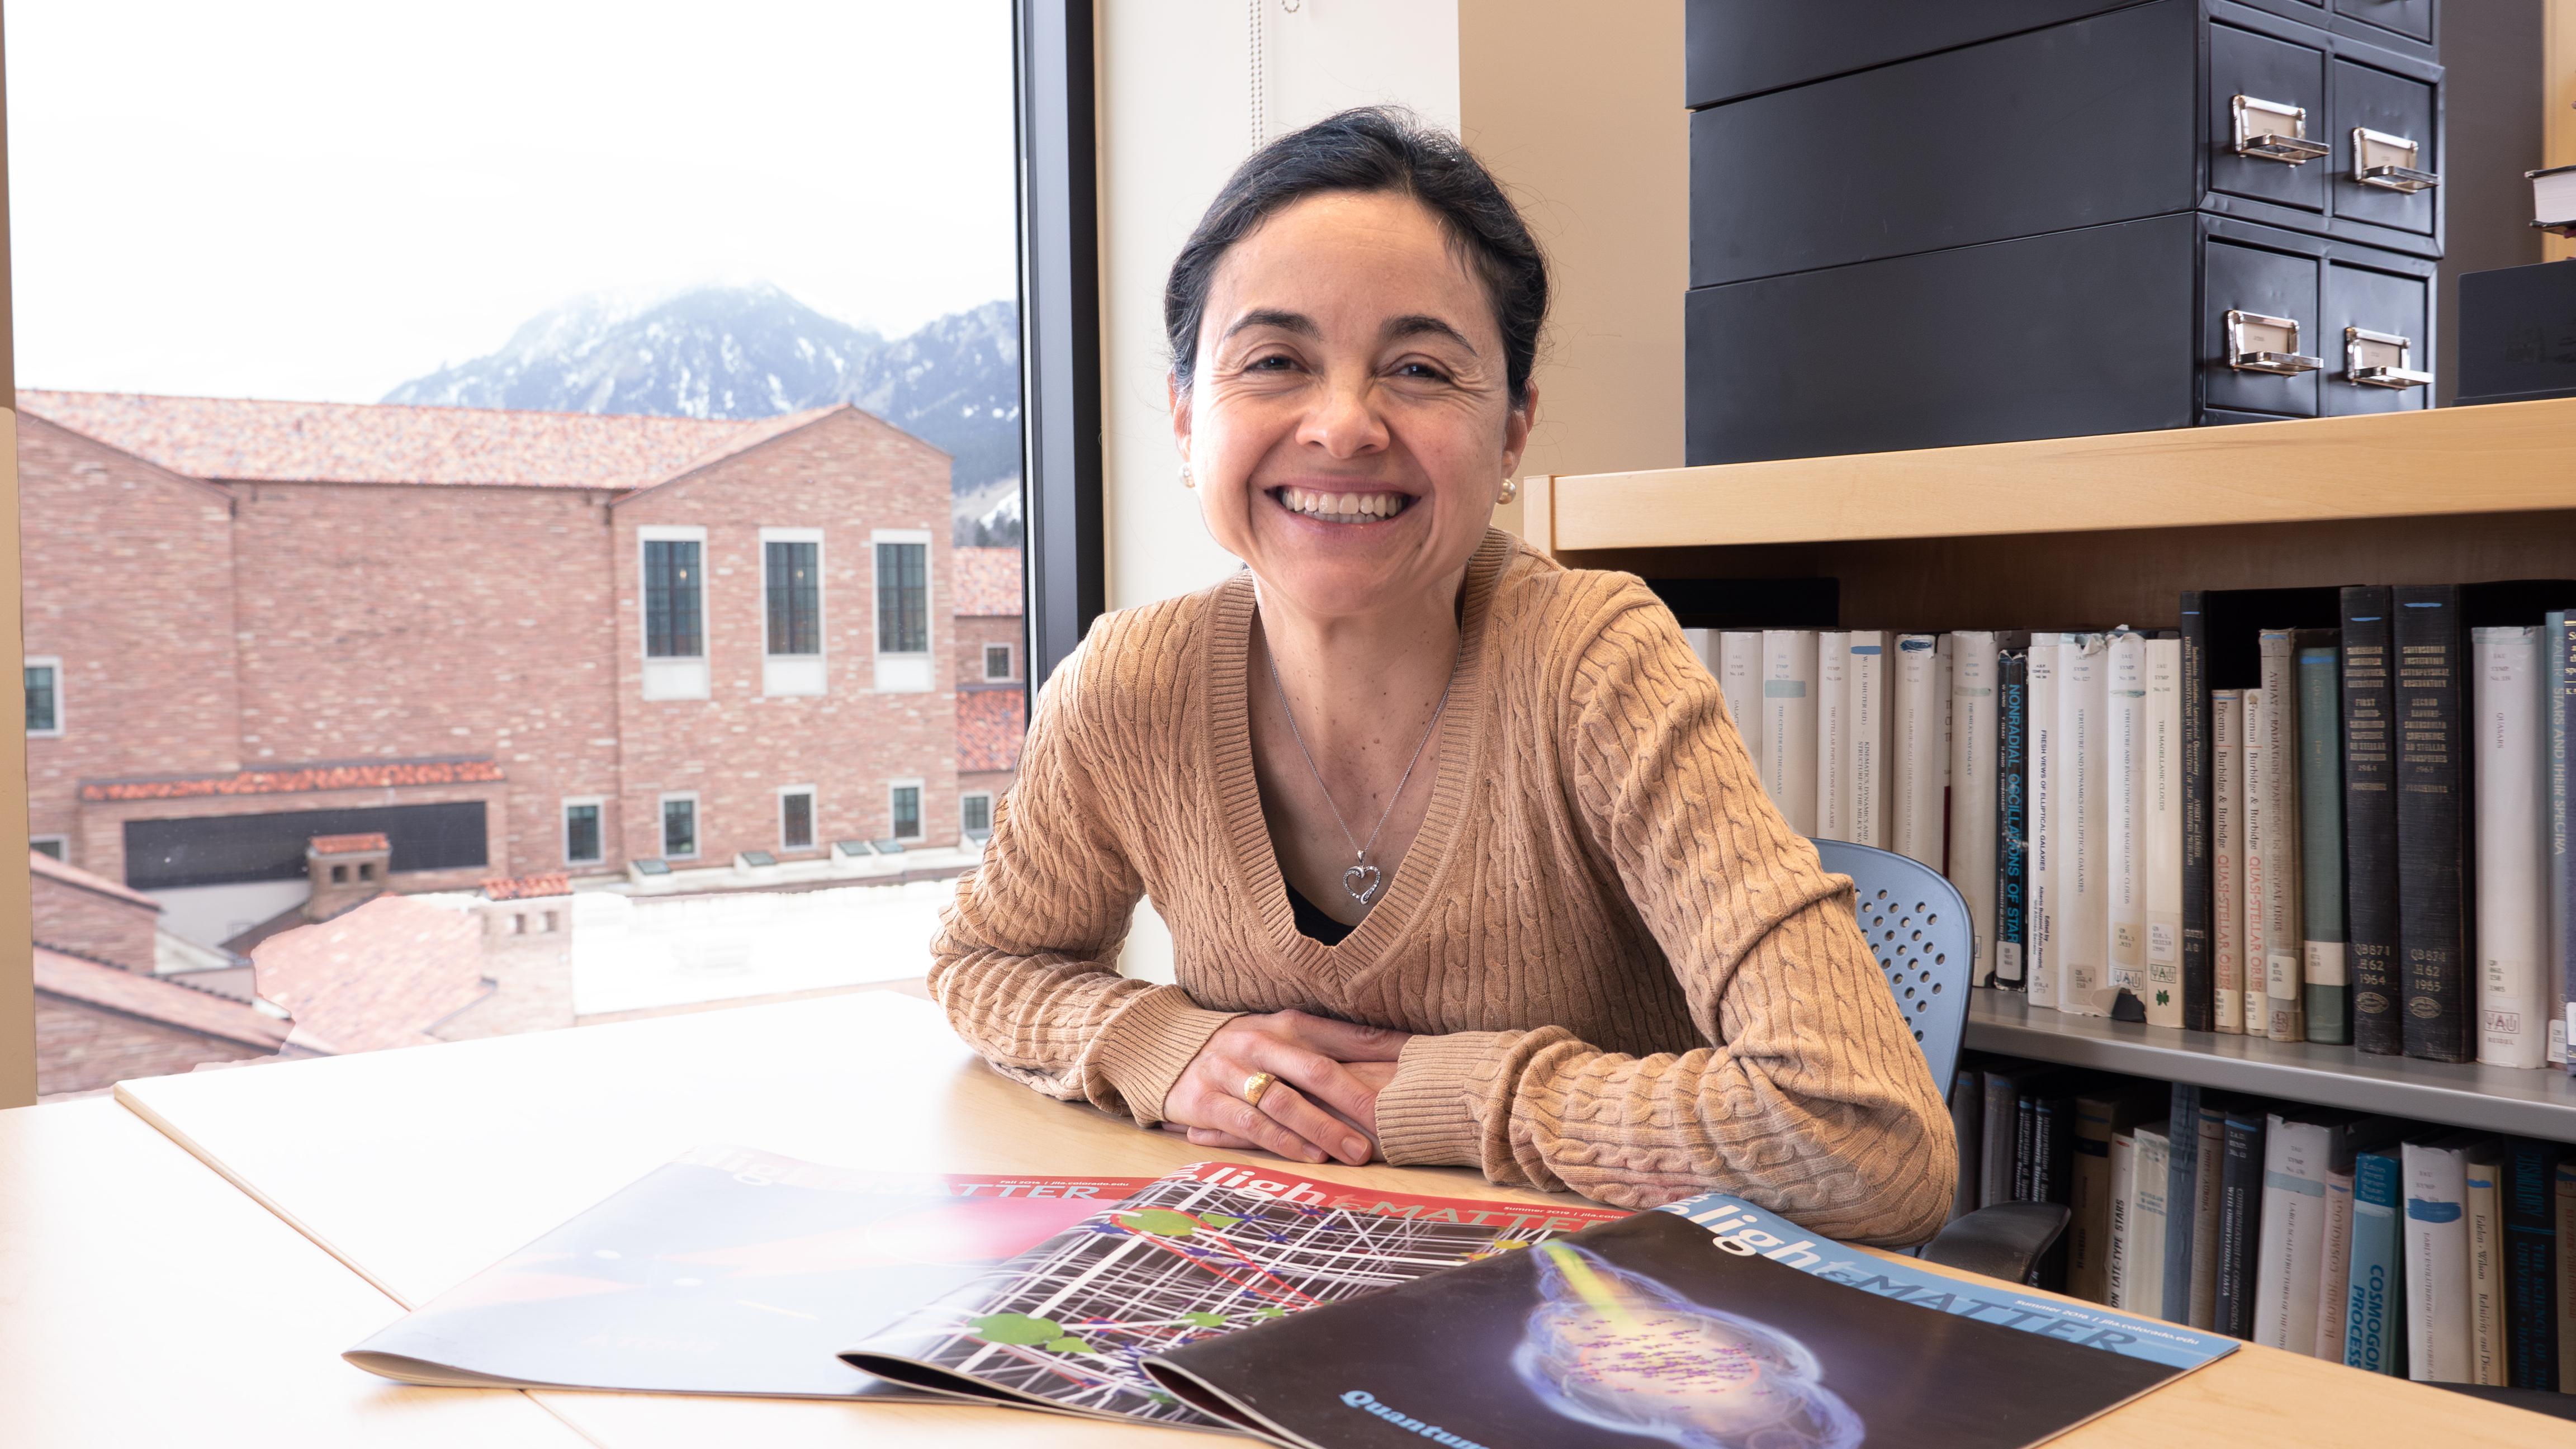 Ana Maria Rey poses at her office desk with physics journals spread out in front of her. Mountains are visible through the window behind her. 